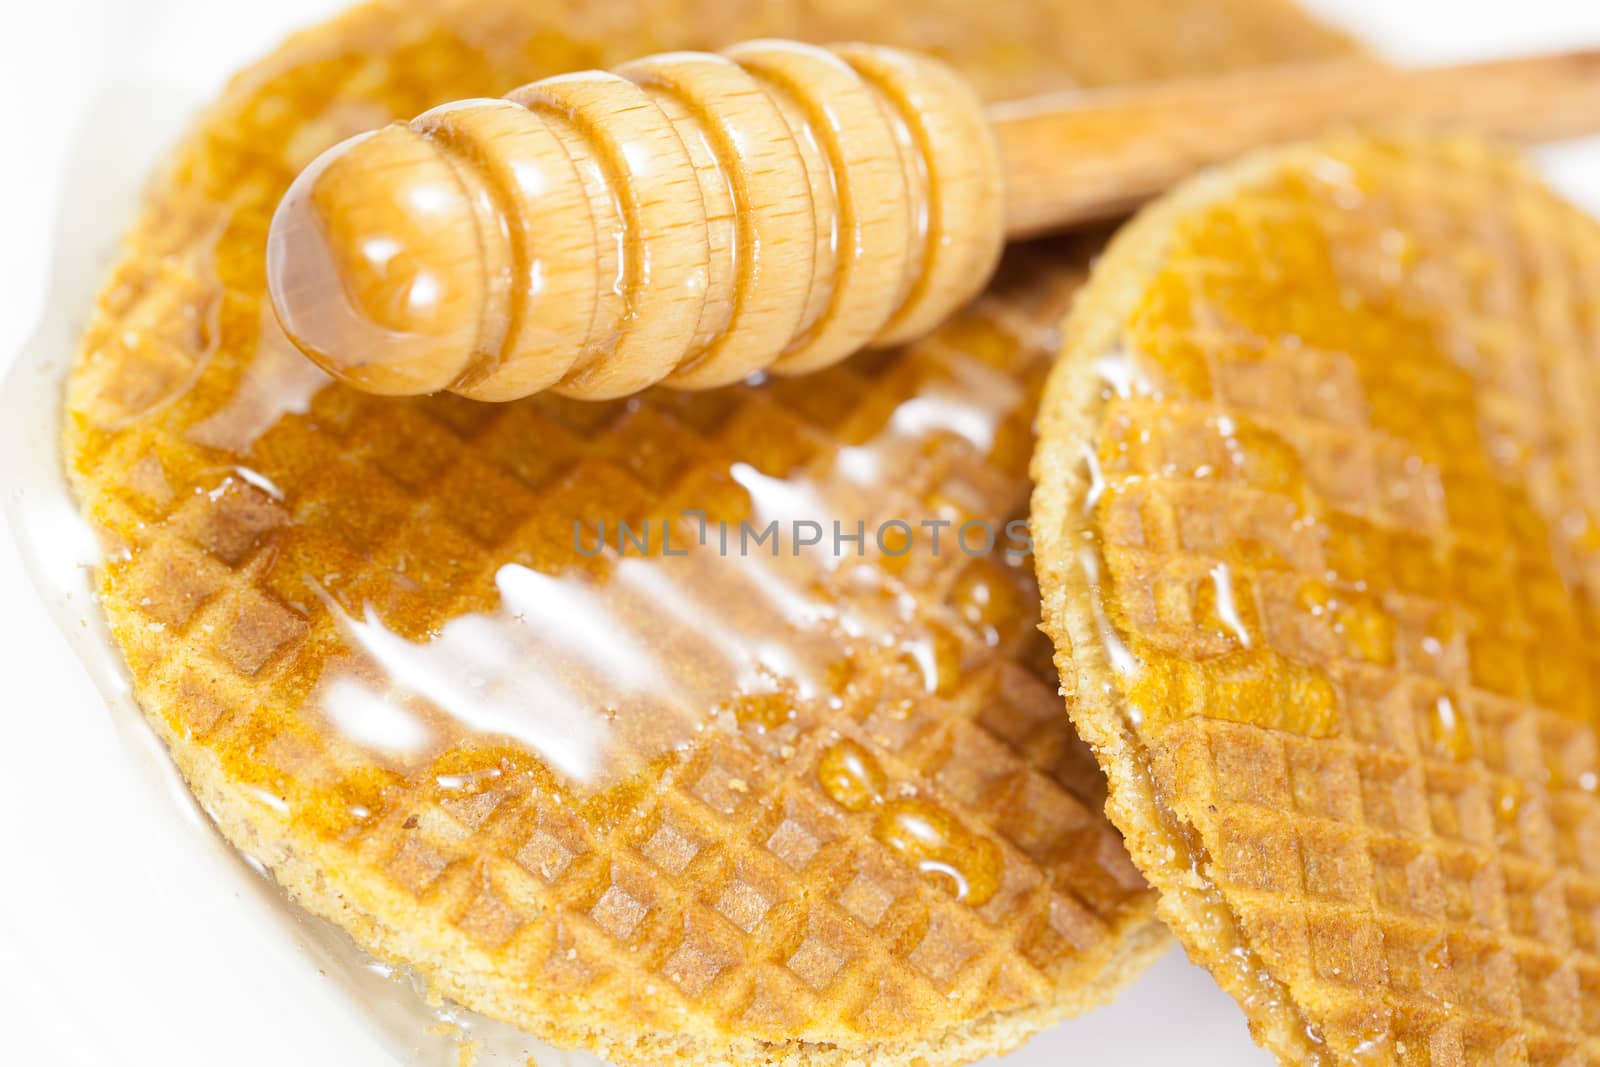 A hearty breakfast of golden brown waffles covered in honey